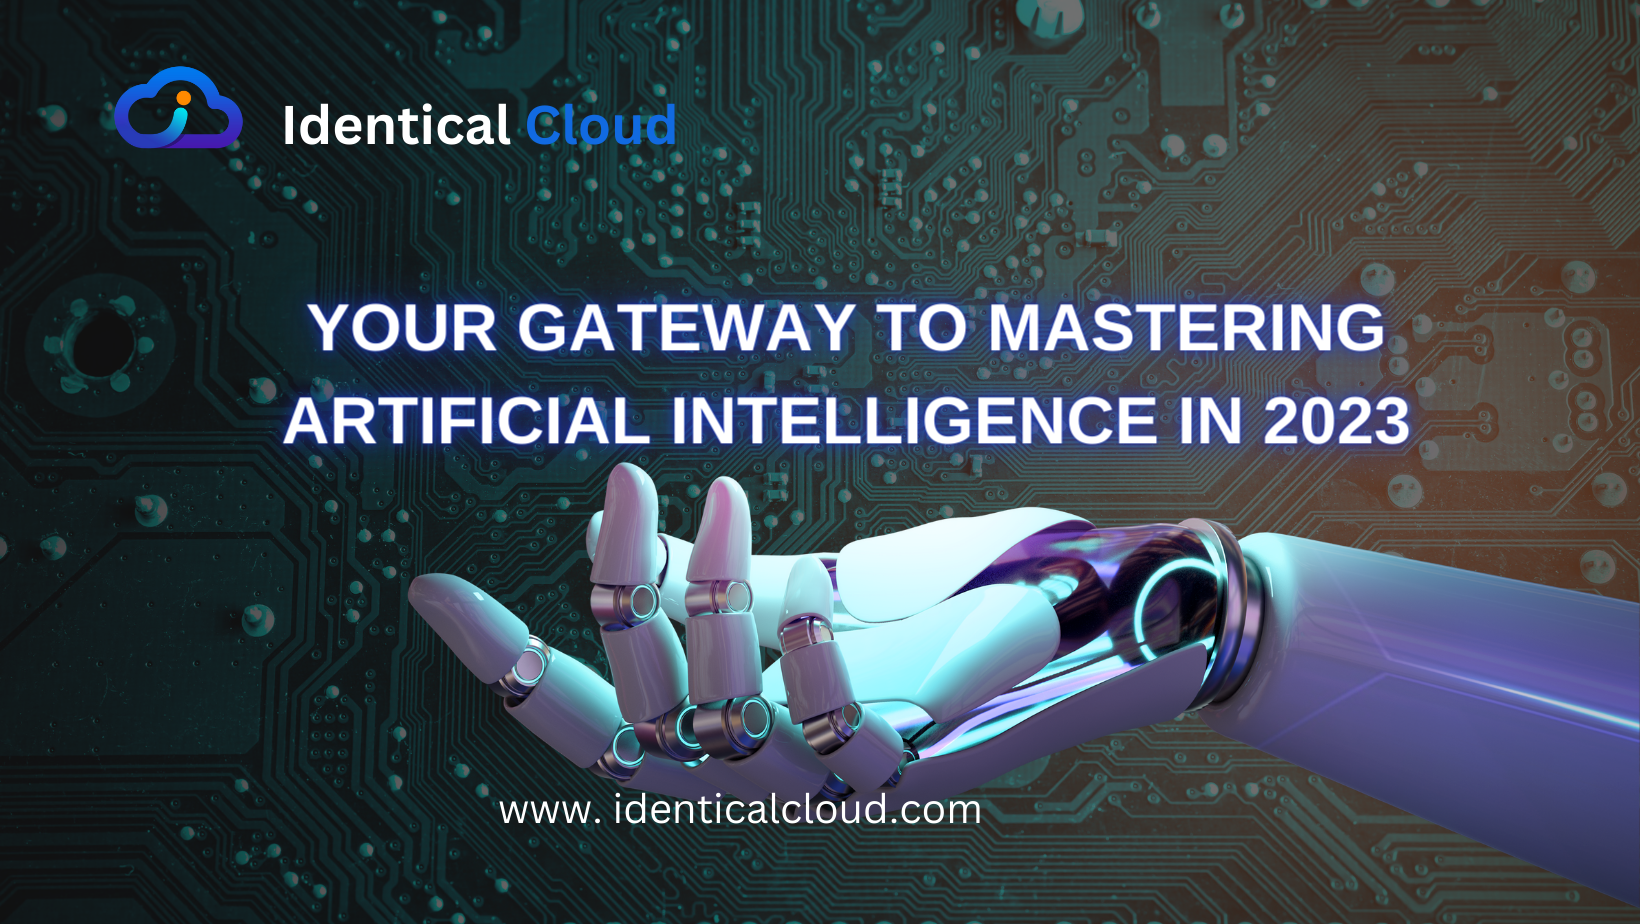 Your Gateway to mastering Artificial Intelligence in 2023 - identicalcloud.com